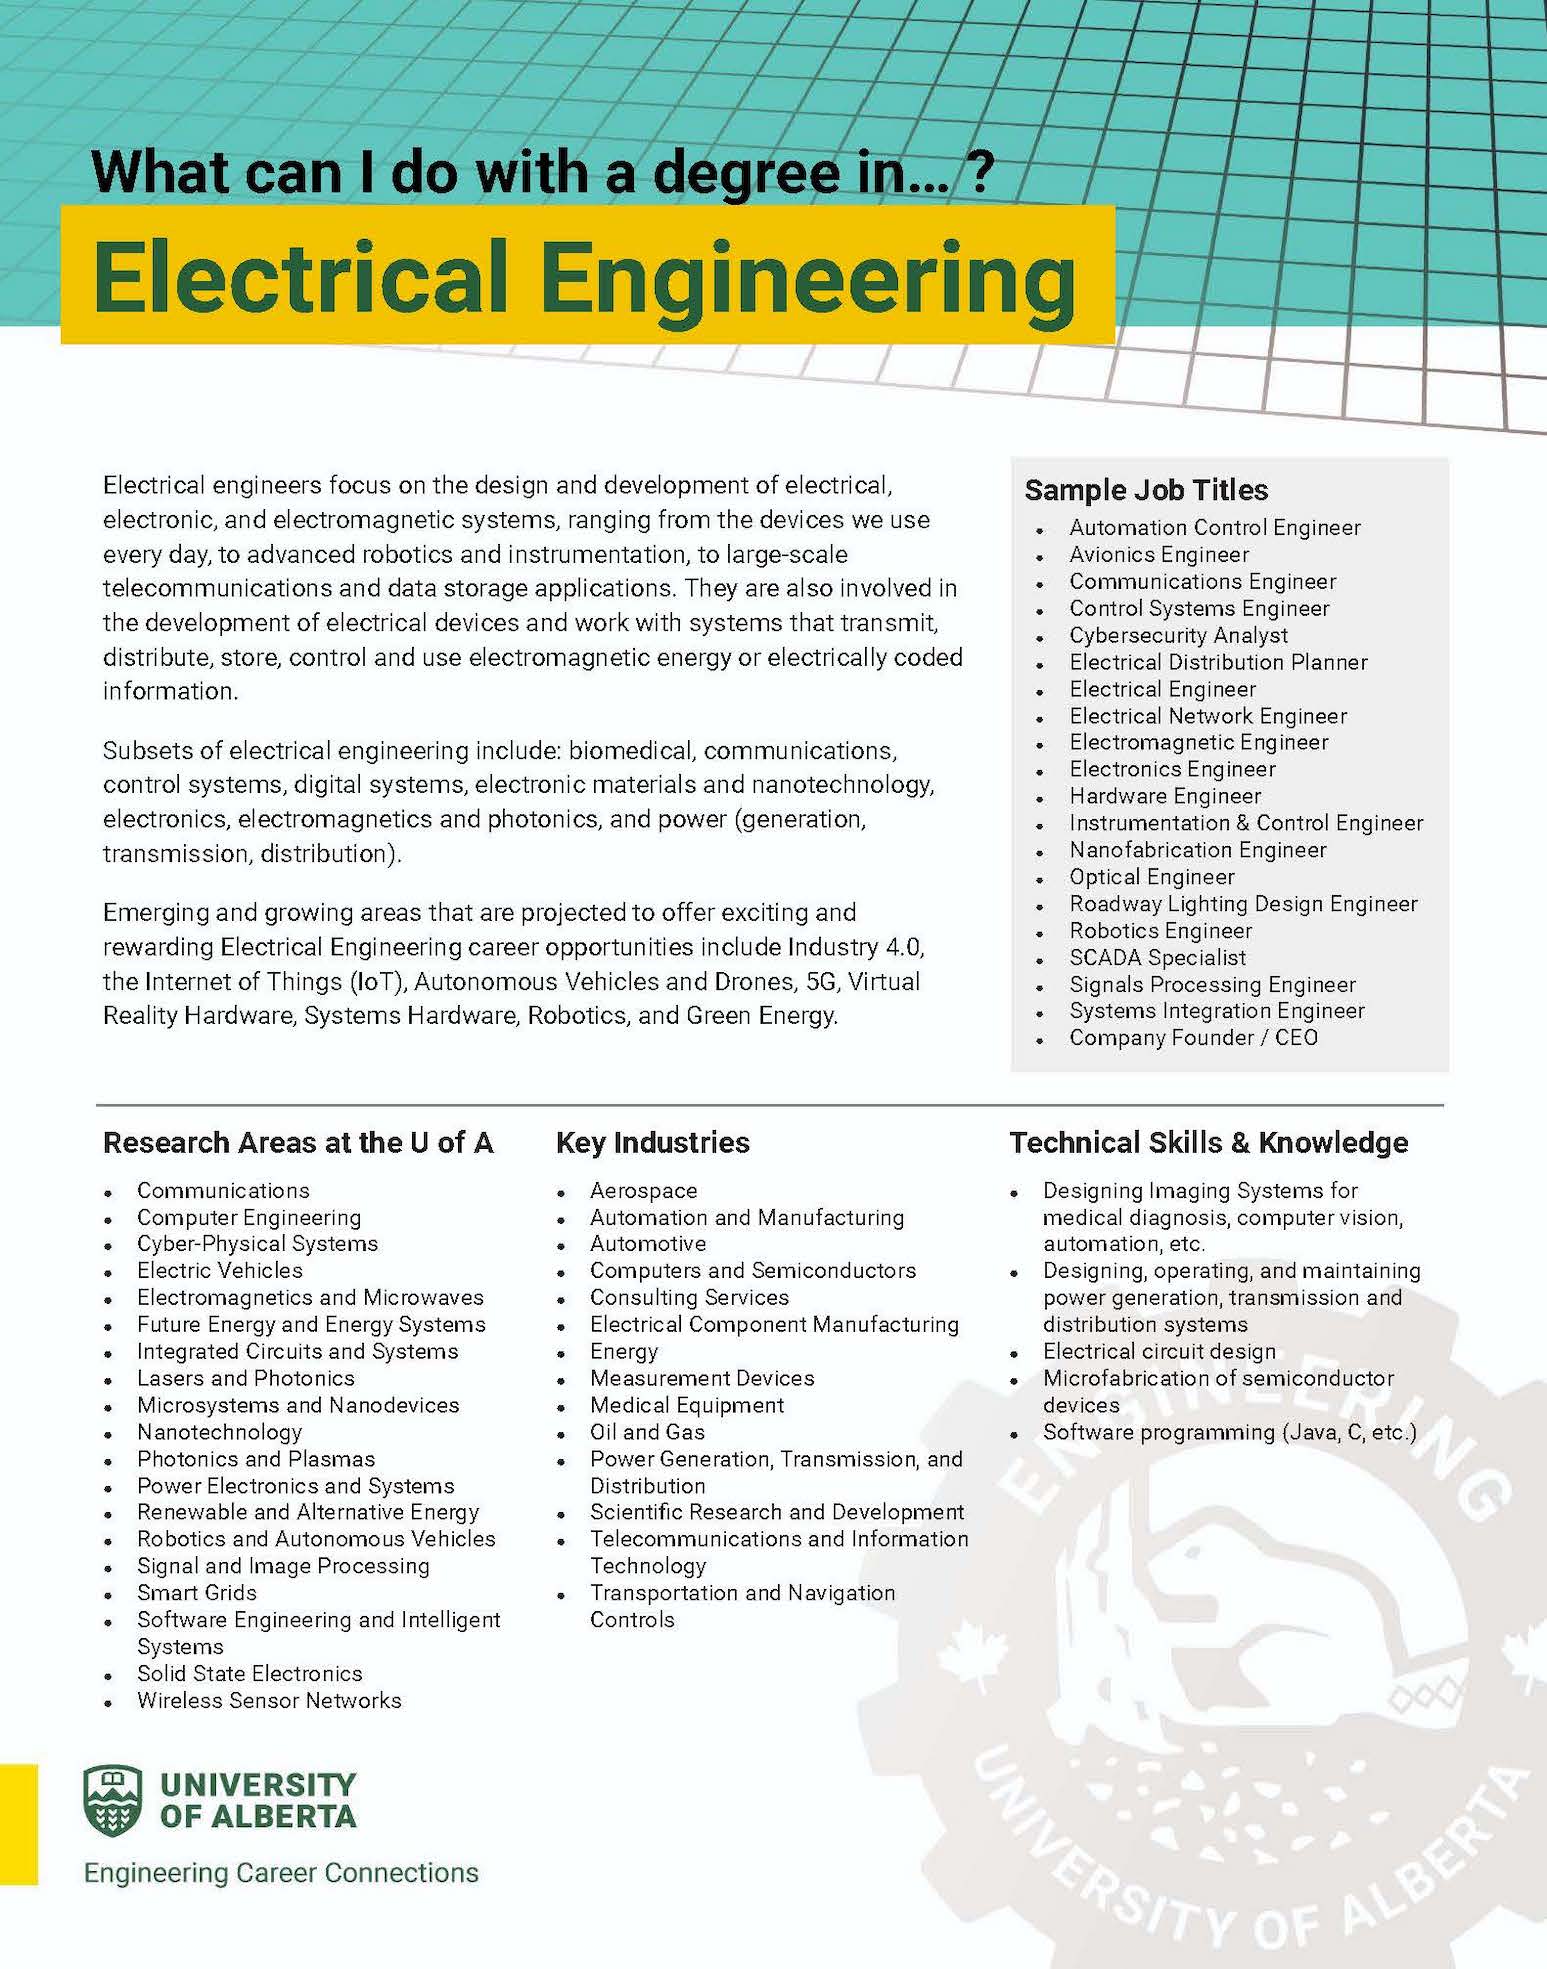 Screenshot of the "What Can I Do With A Degree in Electrical Engineering?” Handout. The image links to the handout.